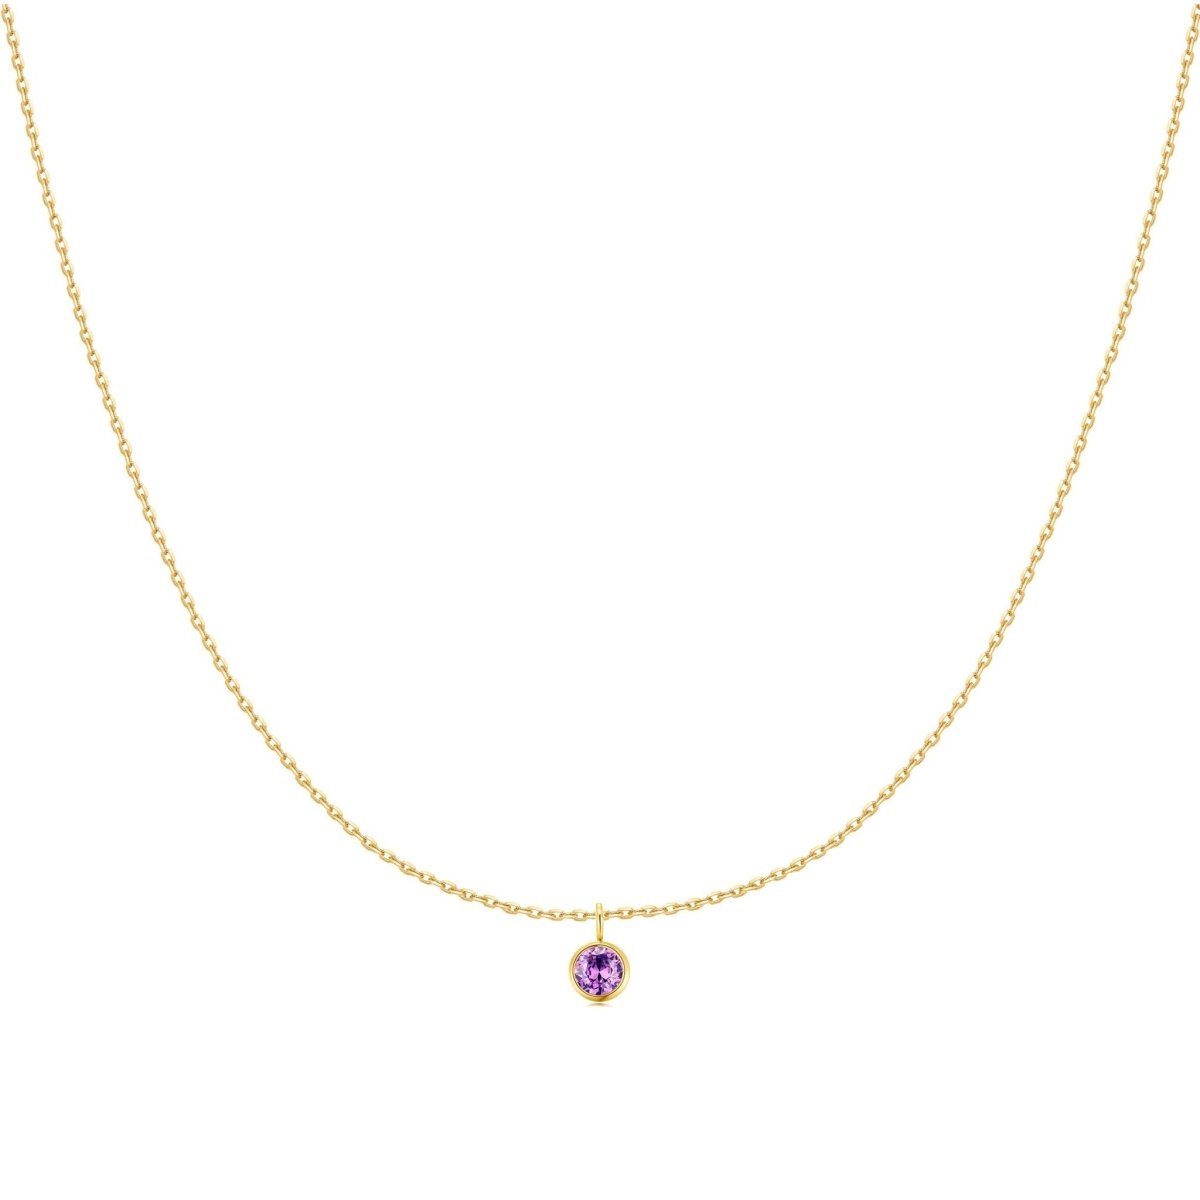 "Colors of the Year" Necklace - Milas Jewels Shop